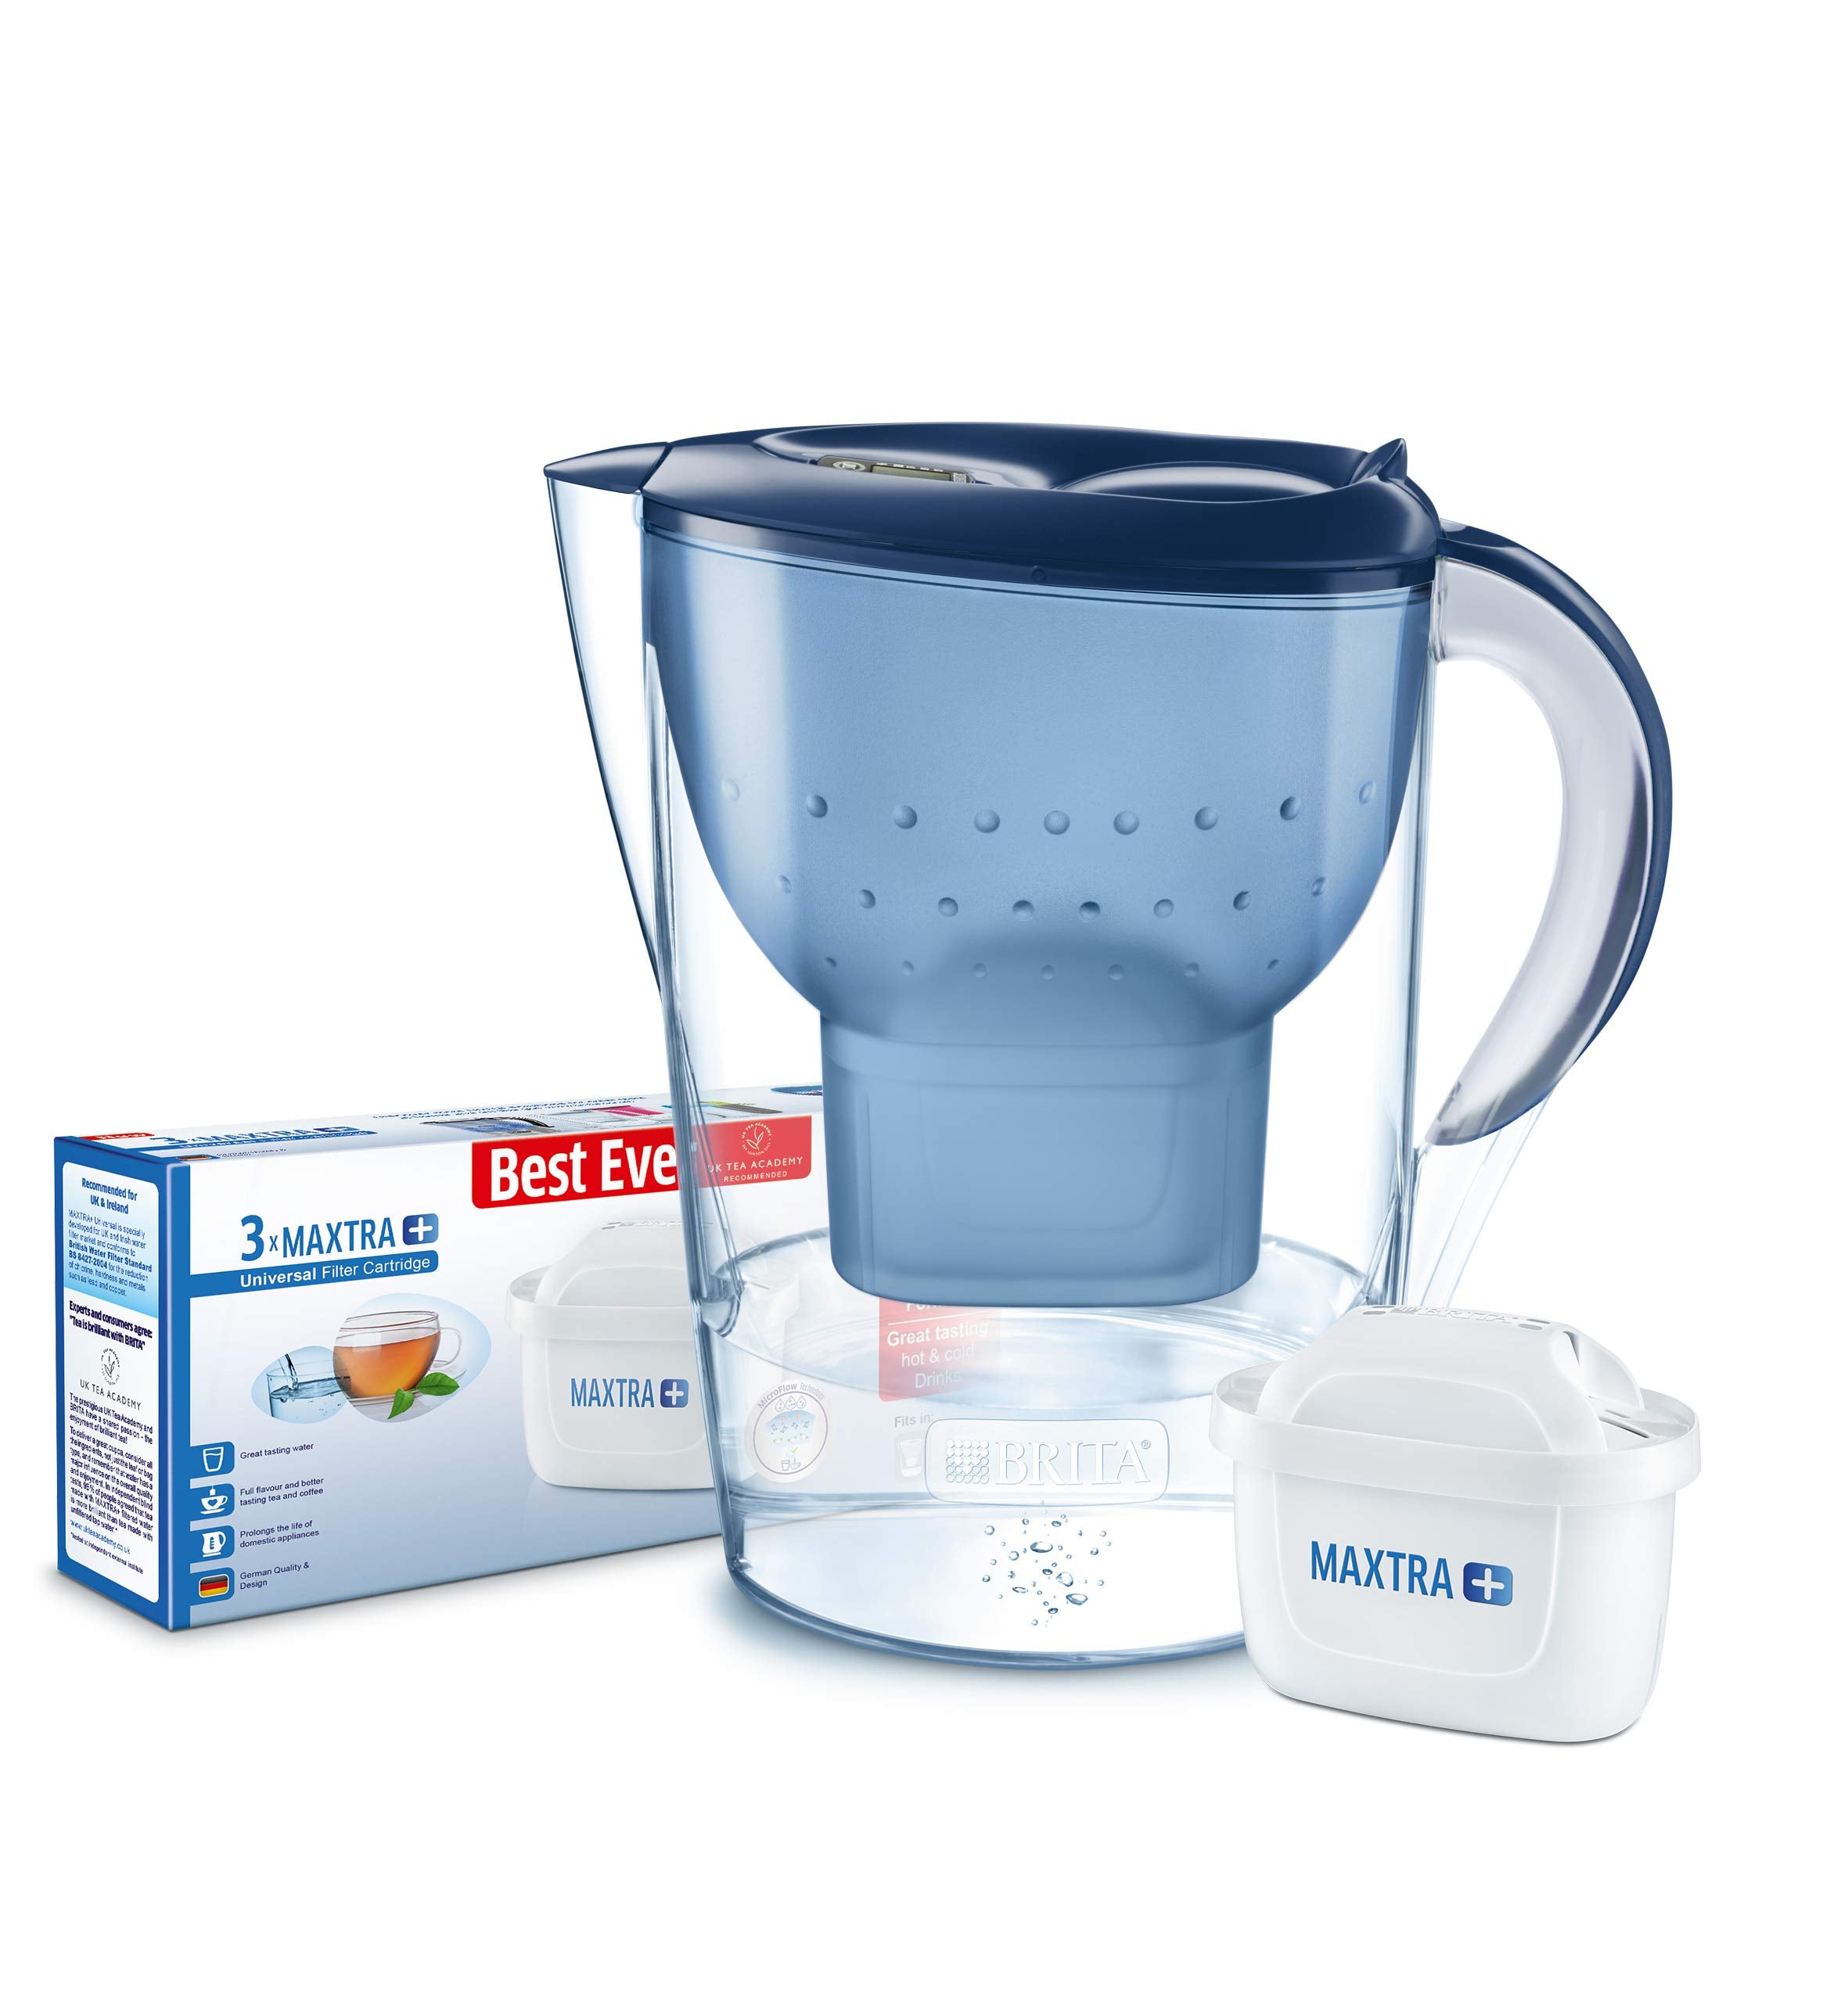 BRITA Marella Water Filter Jug 3.5 L Water Cleaner Pitcher Includes 3  MAXTRA+ Filter Cartridge Purification Filter Blue Colour